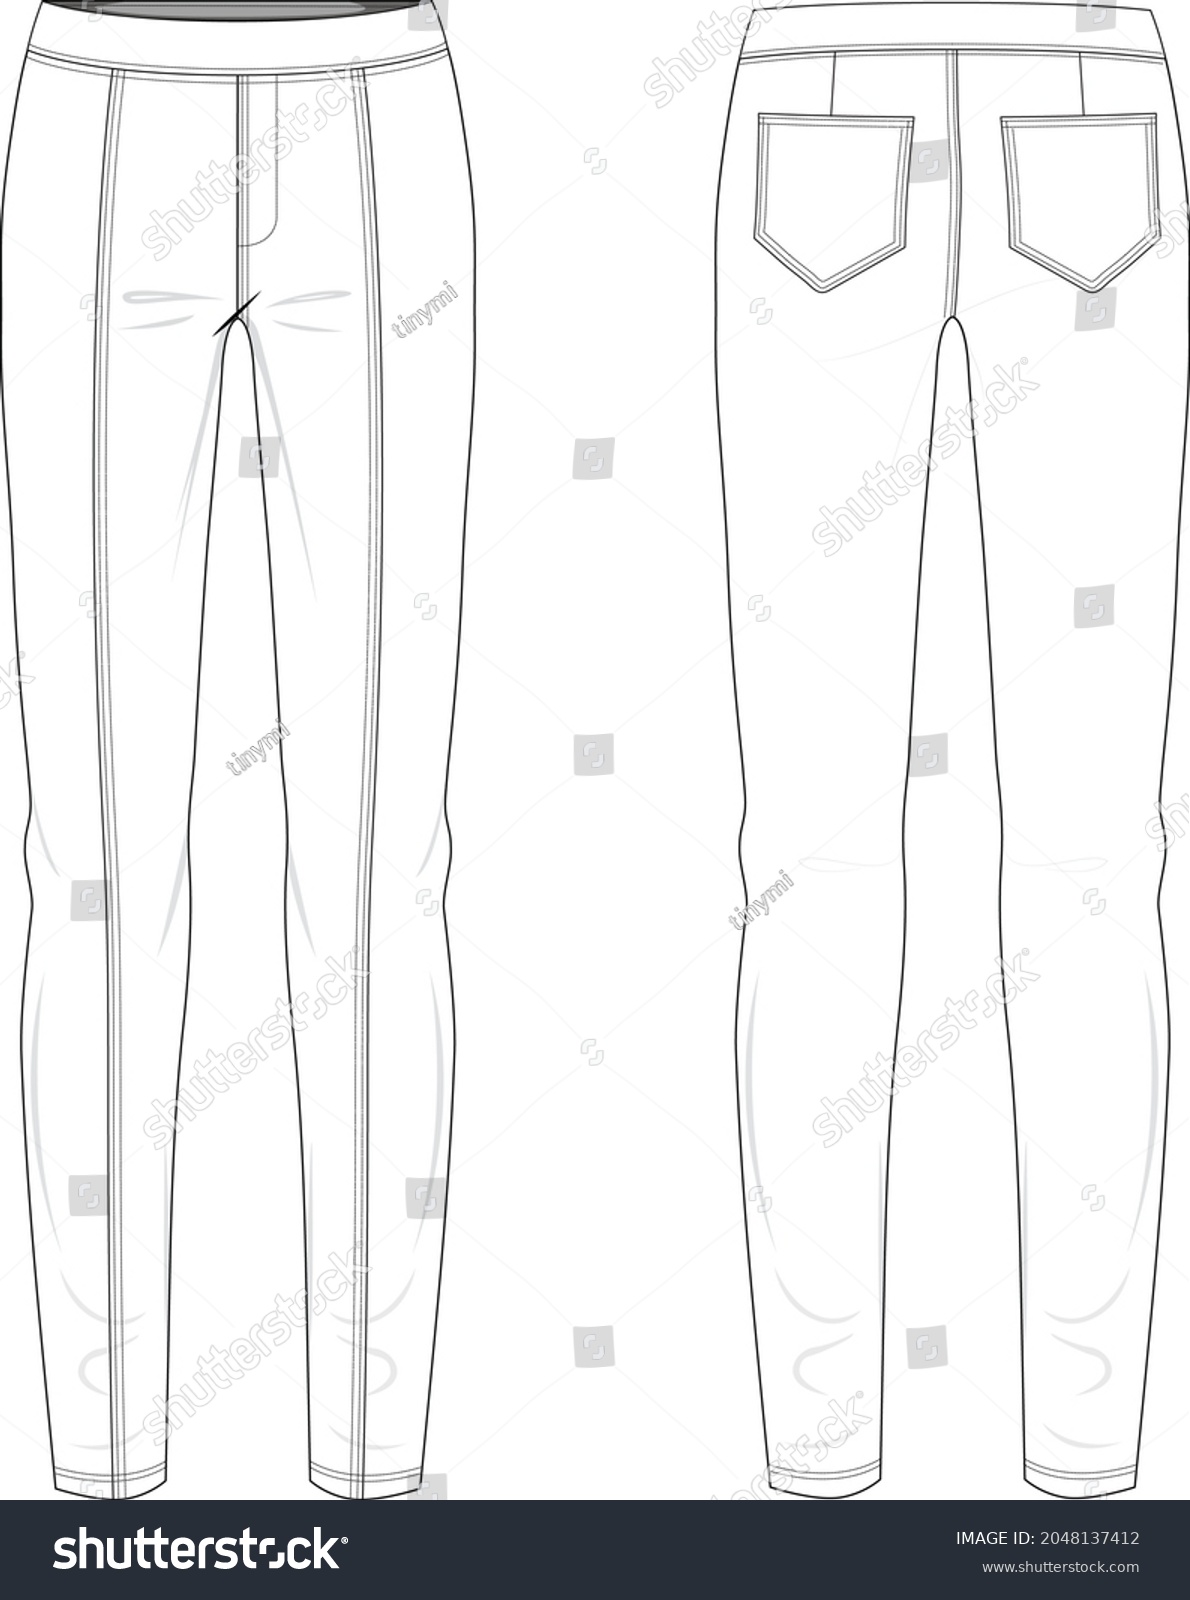 Skinny Jean Technical Drawing Cad Vector Stock Vector (Royalty Free ...